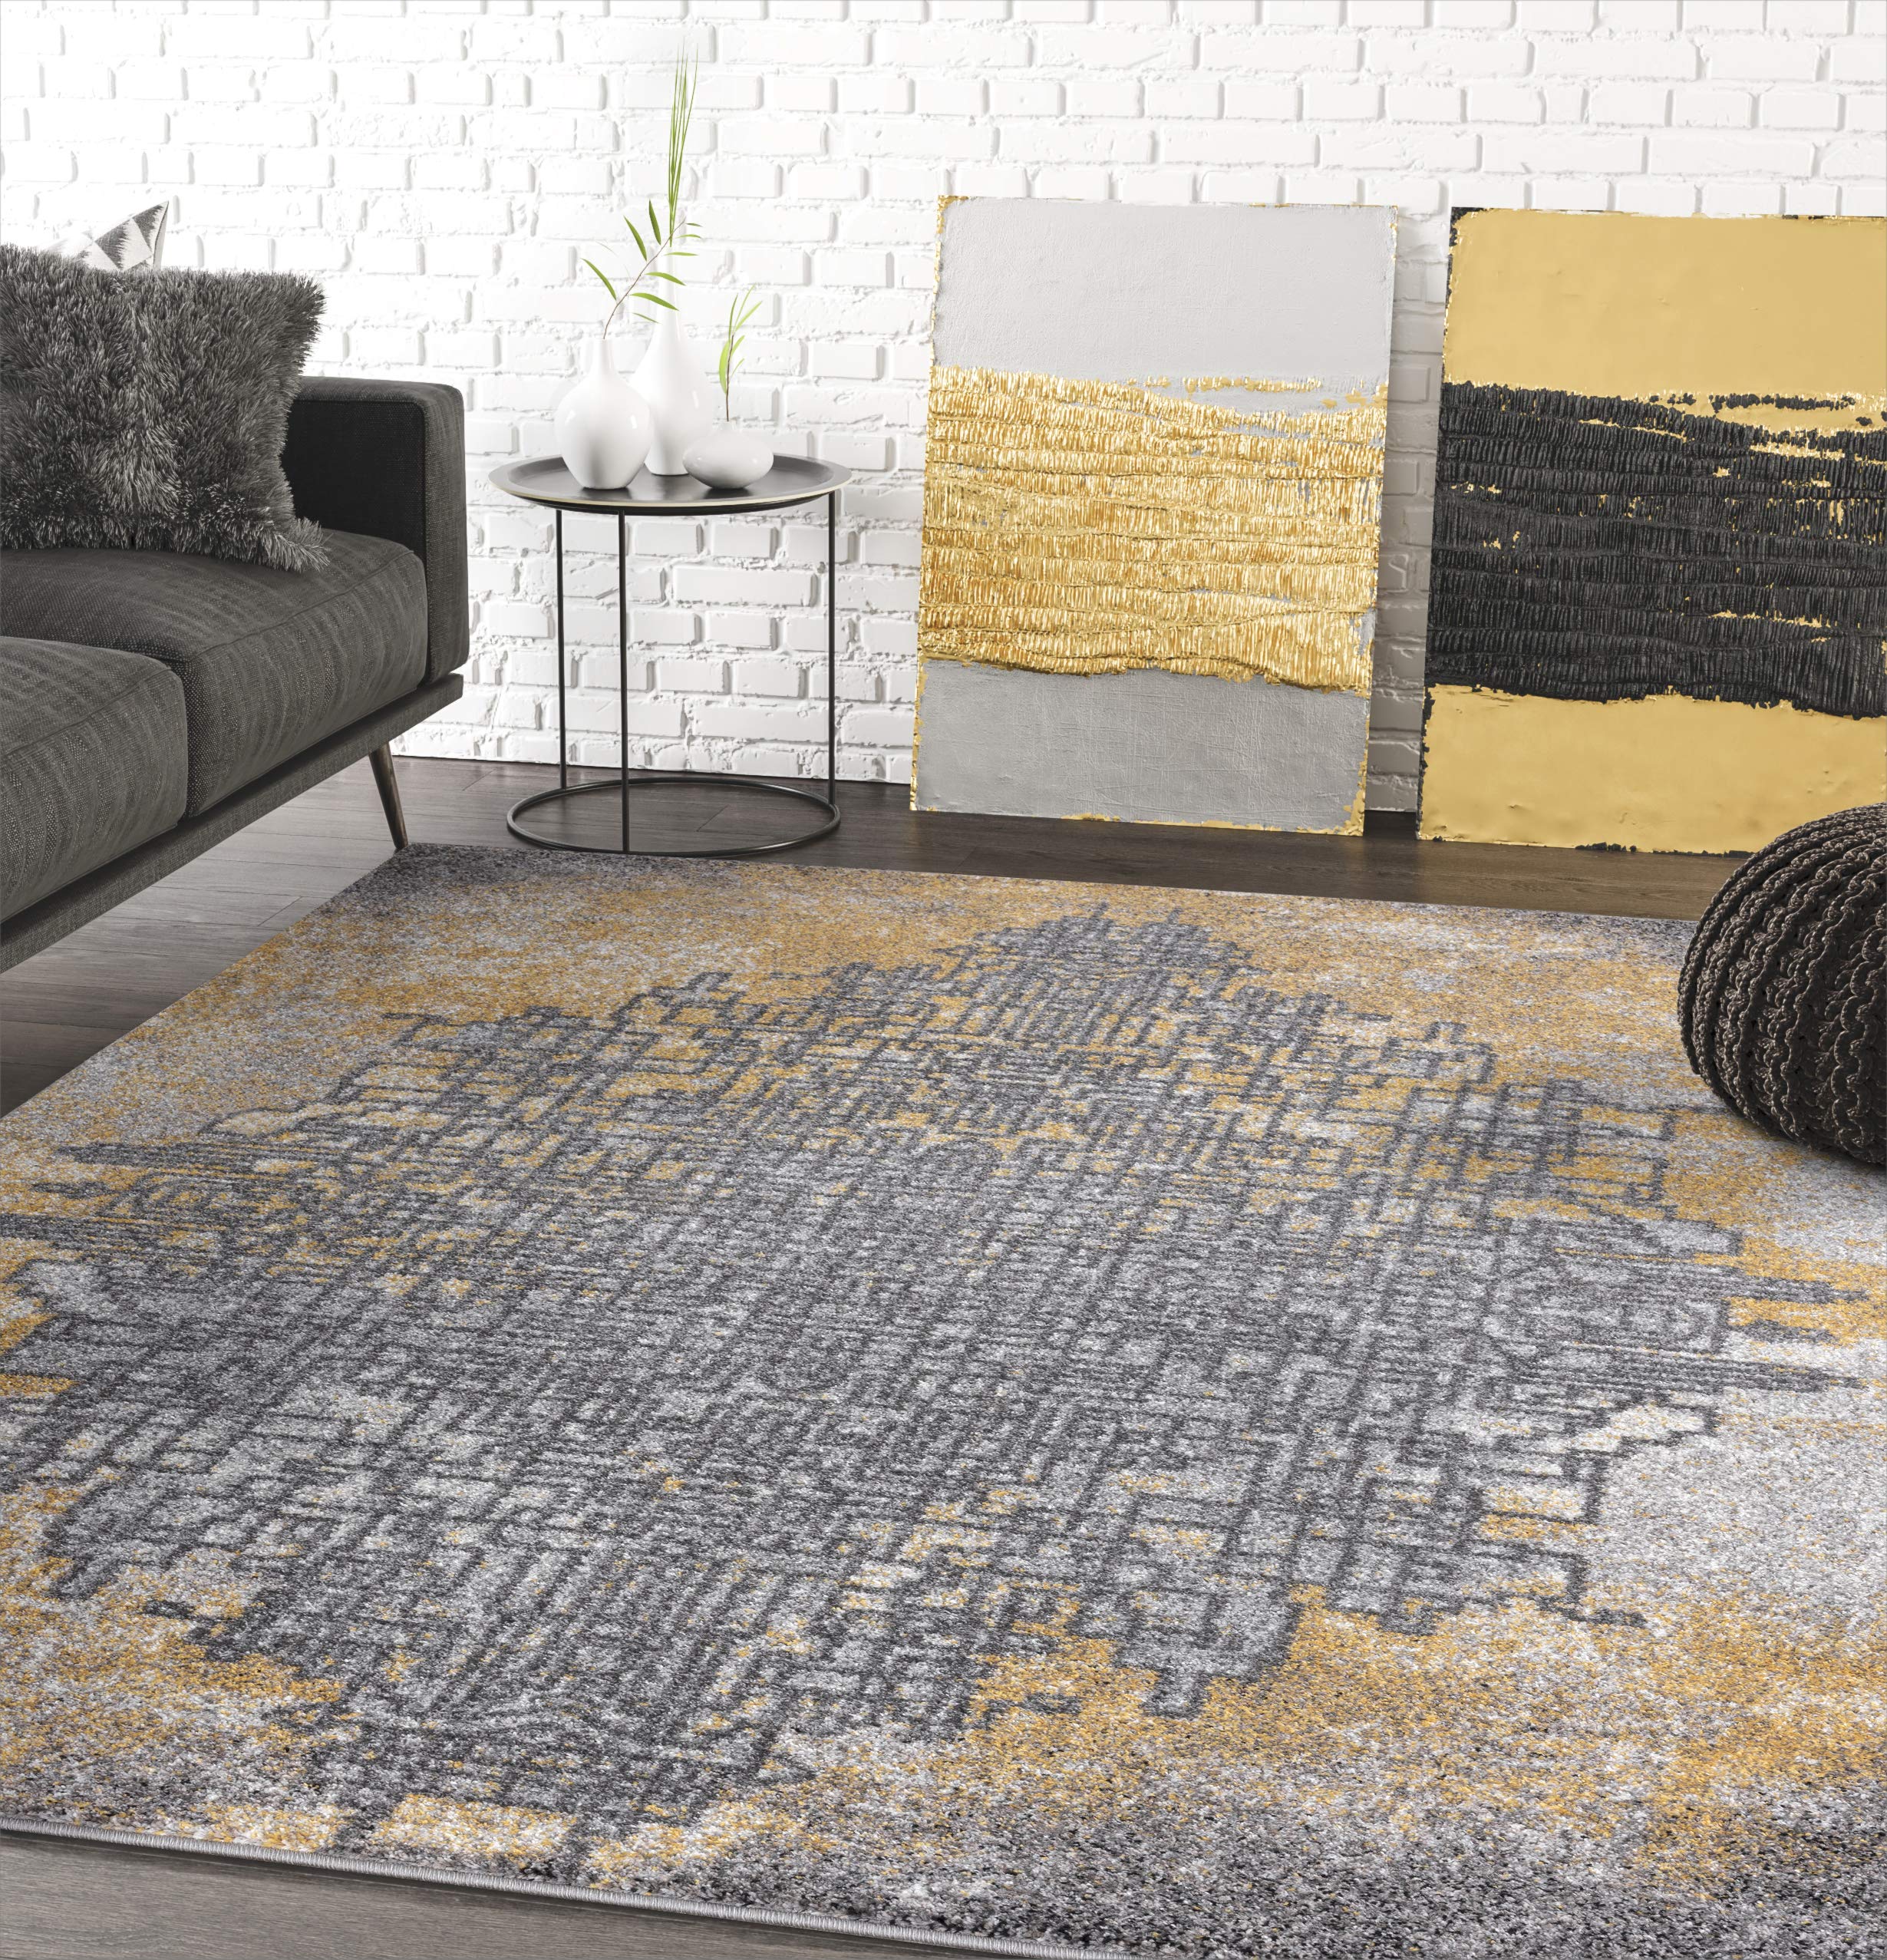 Grey & Yellow Abstract Art Area Rug, Contemporary Style - Abani Rugs Laguna Collection Modern 3' x 5' Rectangle Accent Rug